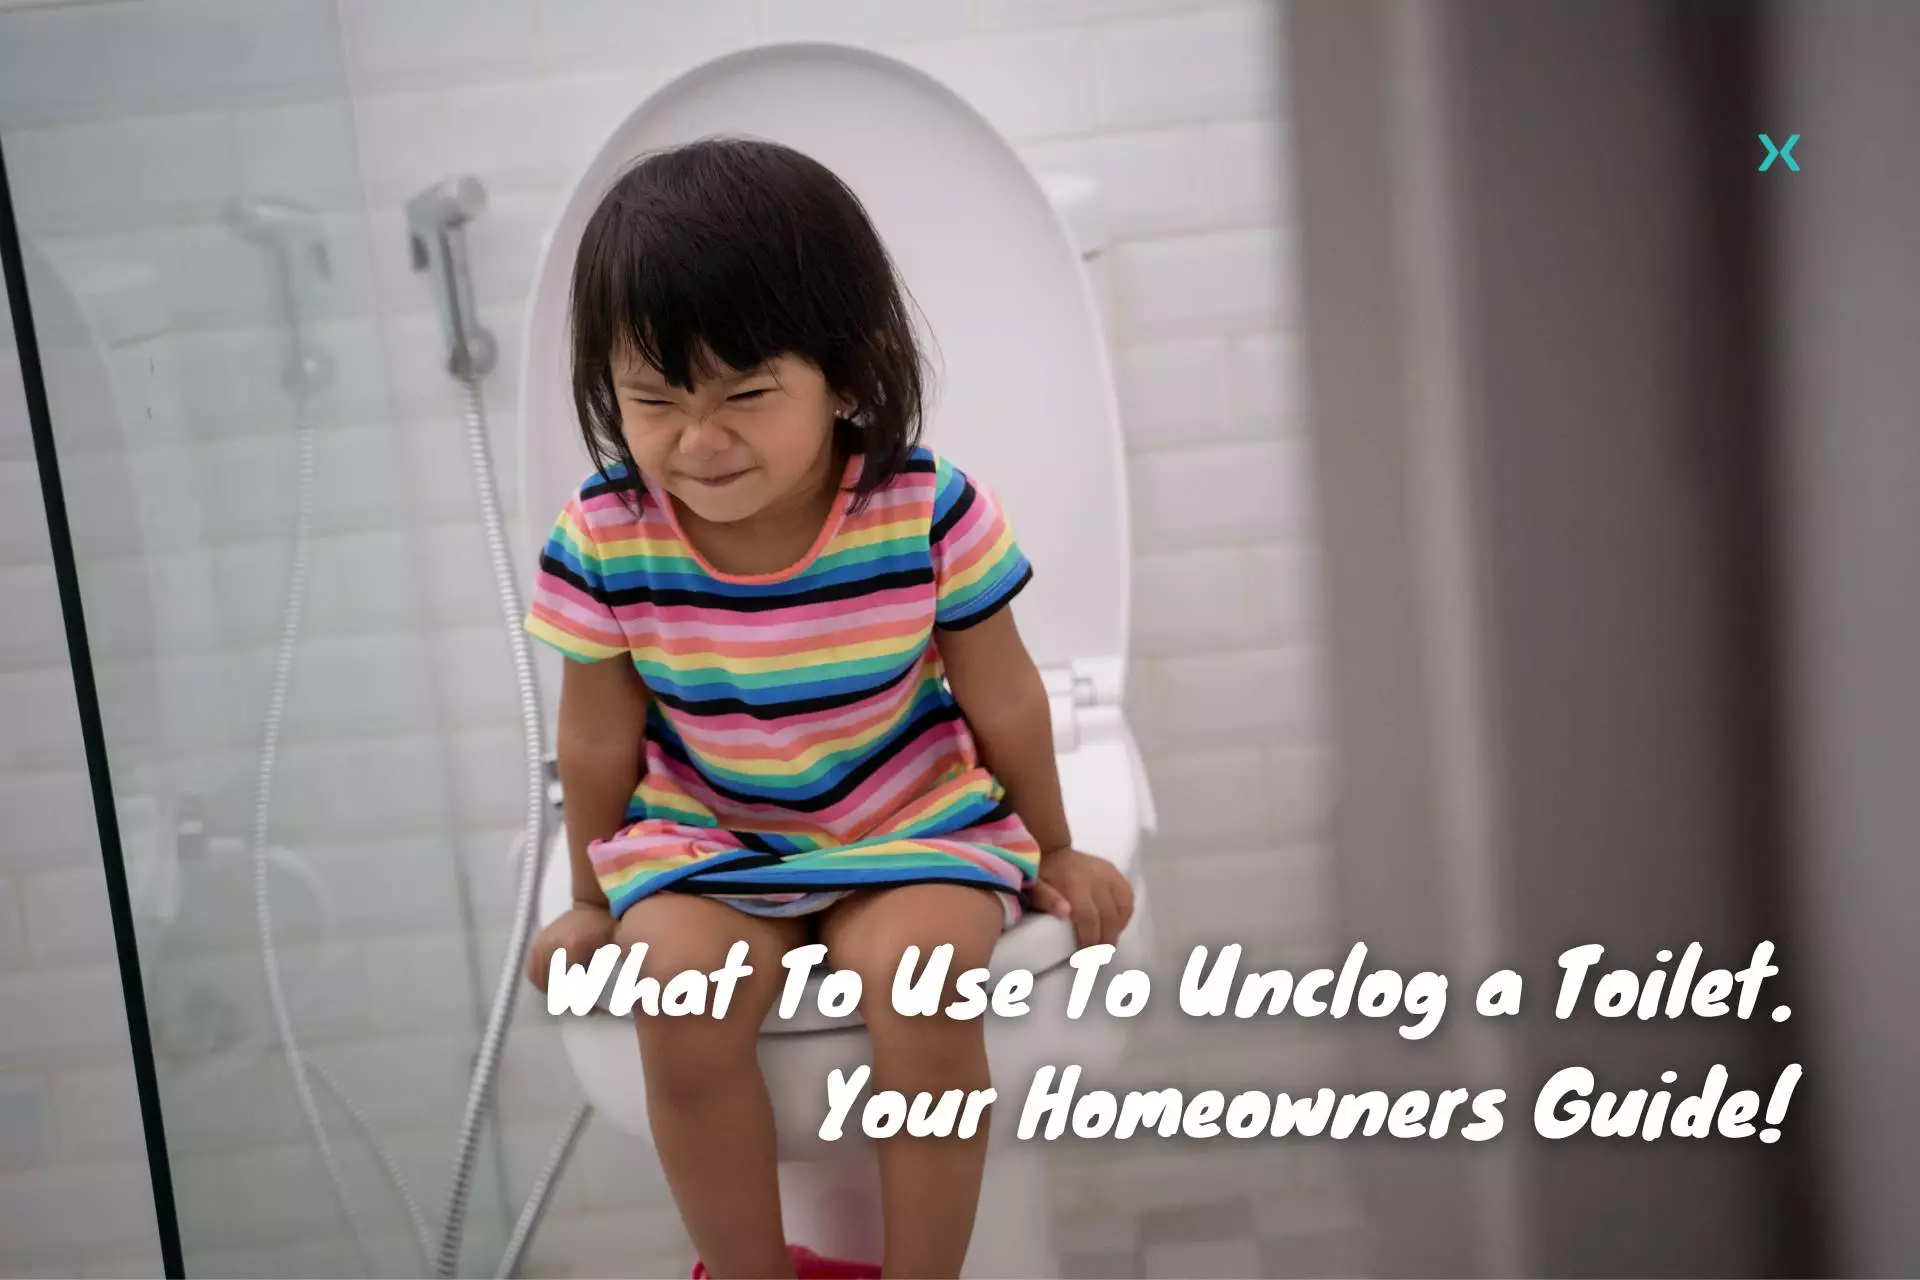 What To Use To Unclog a Toilet. young girl on a toilet